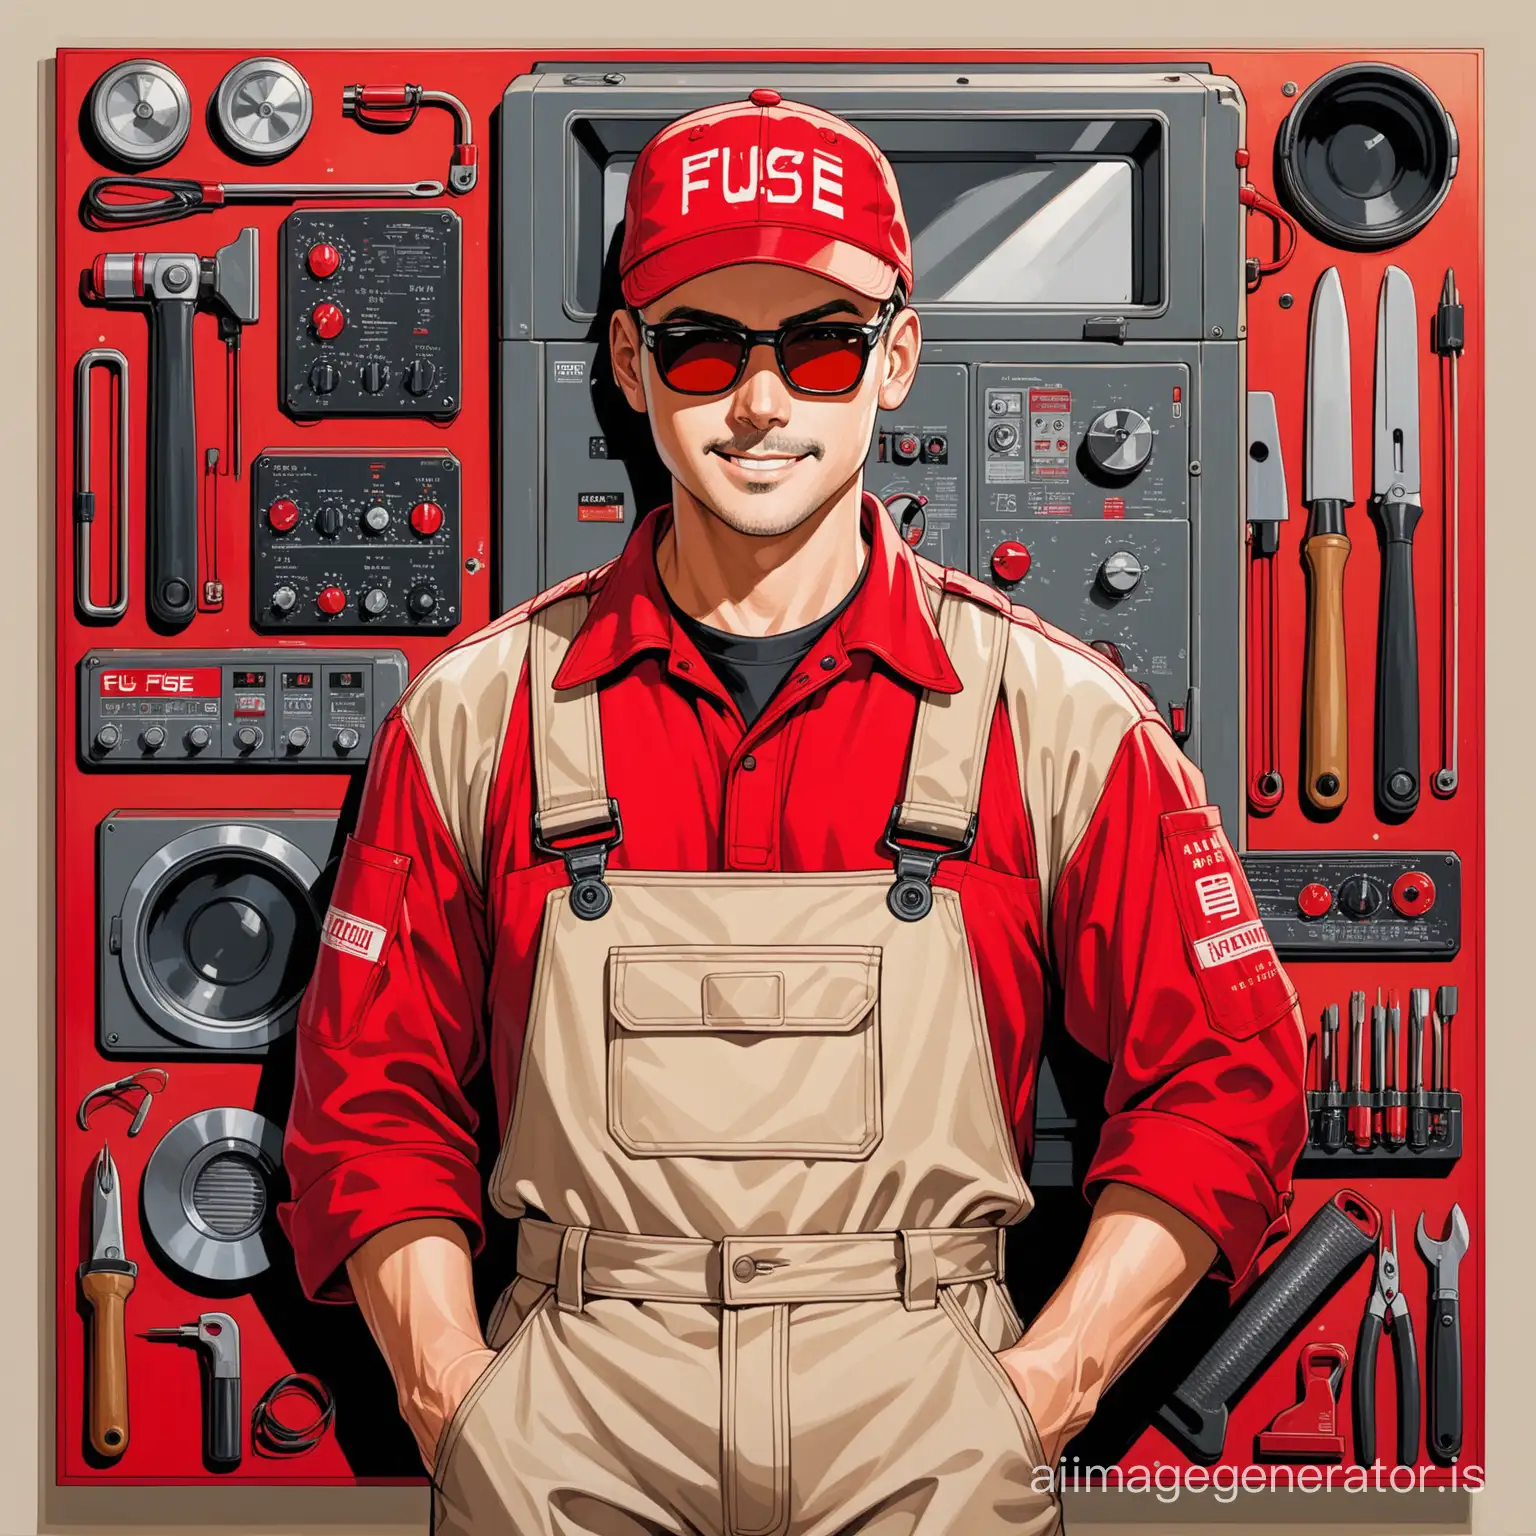 Cheerful-Repairman-Surrounded-by-Tools-in-FUSE-Uniform